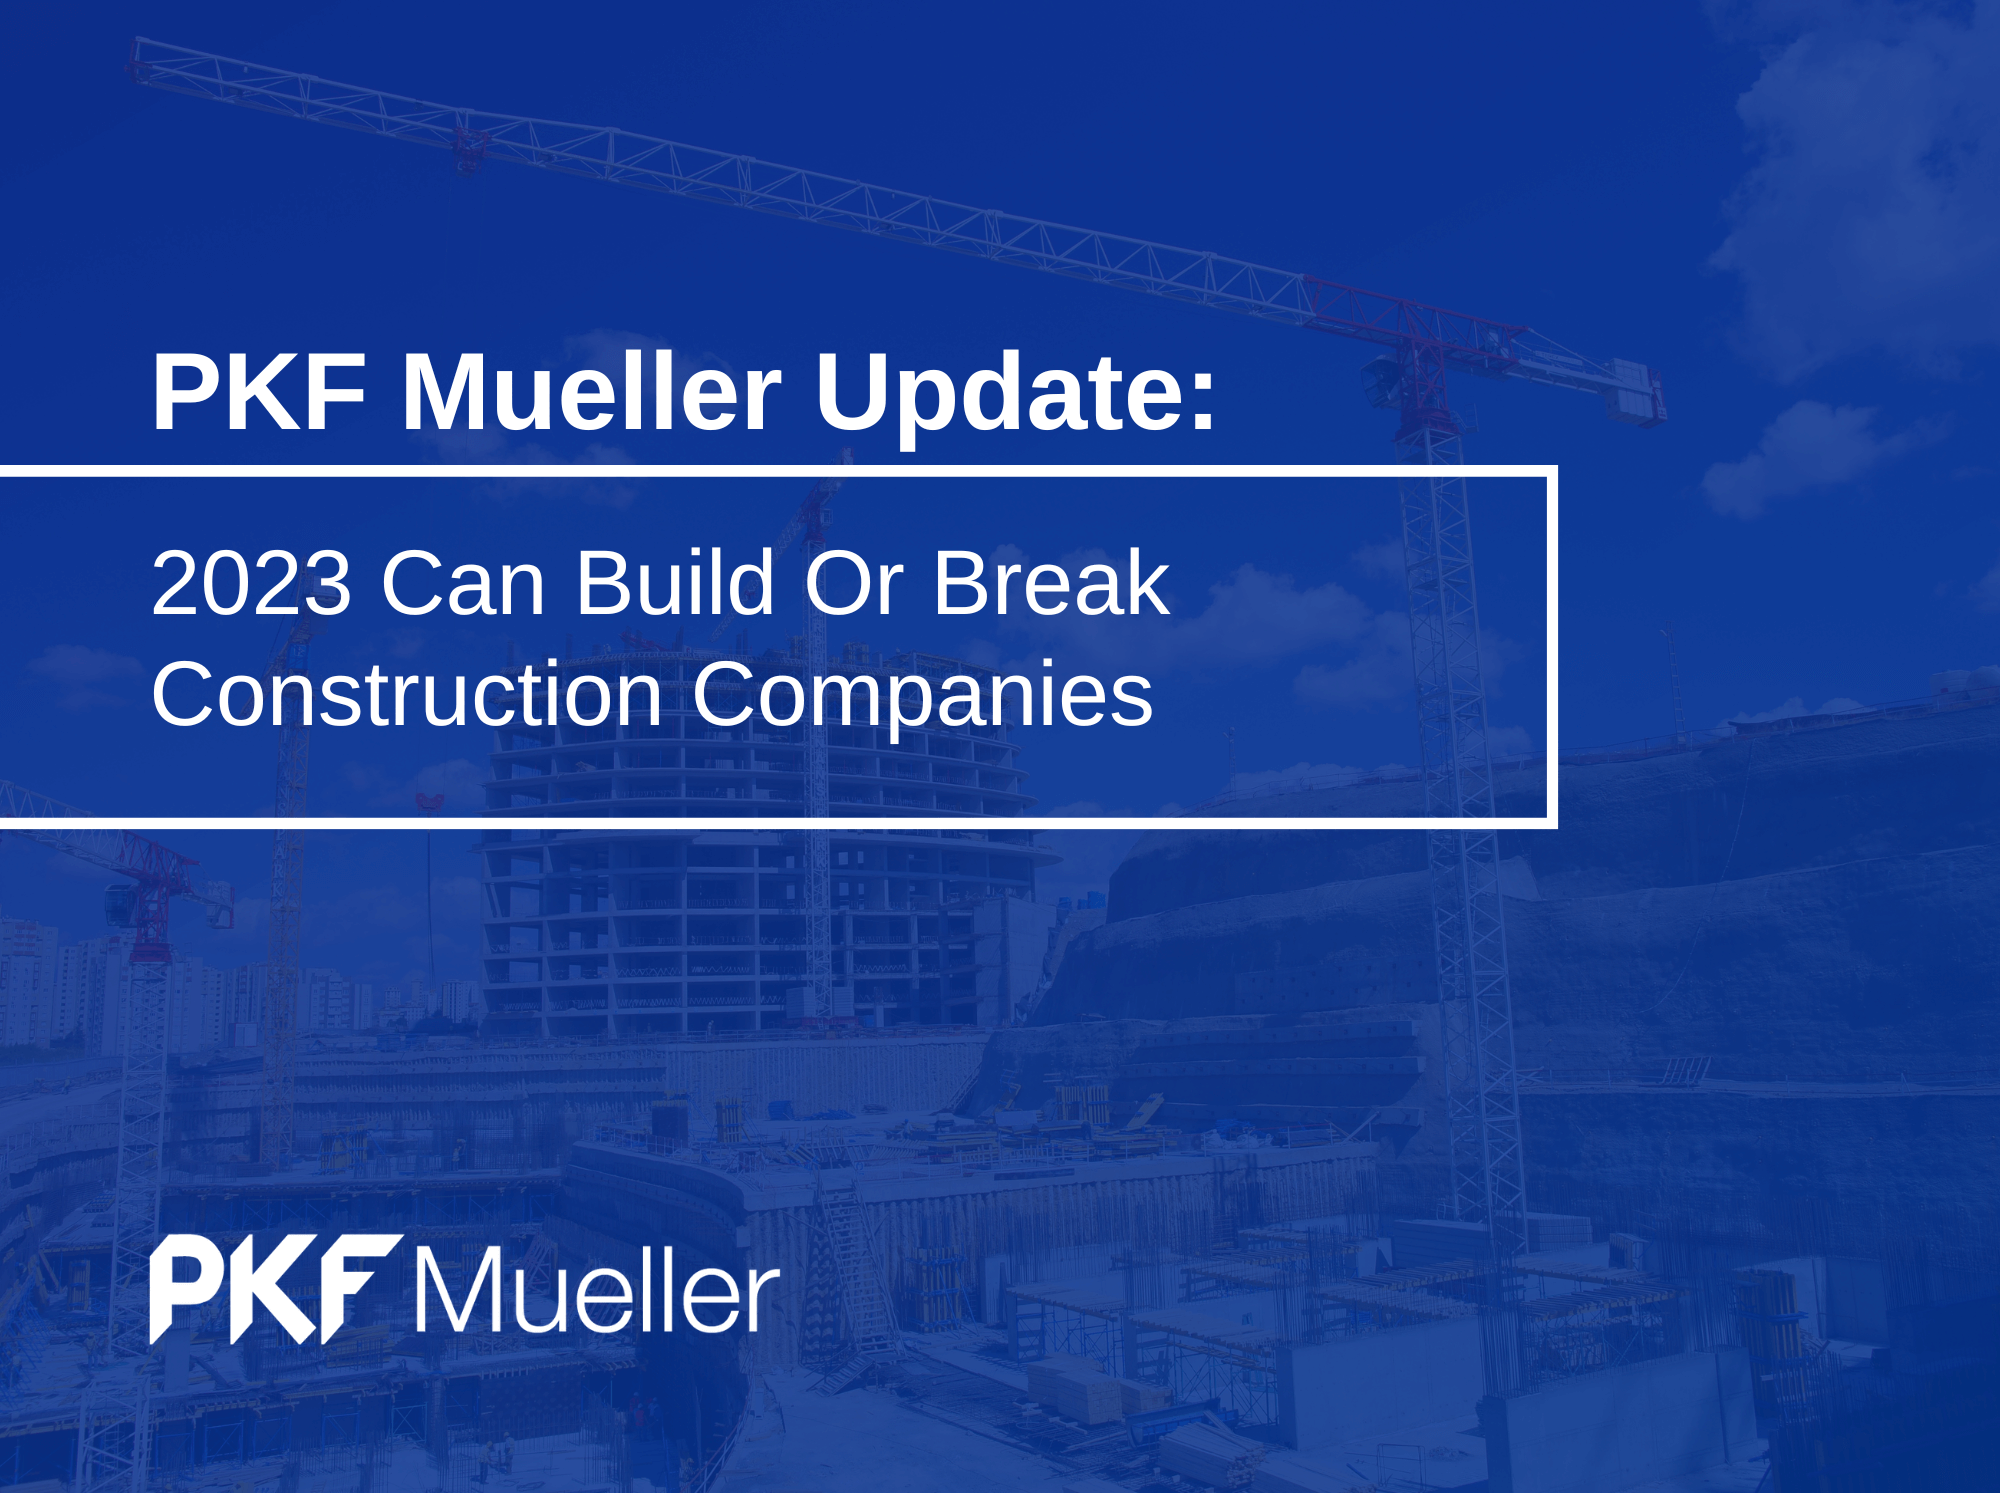 2023 Can Build or Break Construction Companies